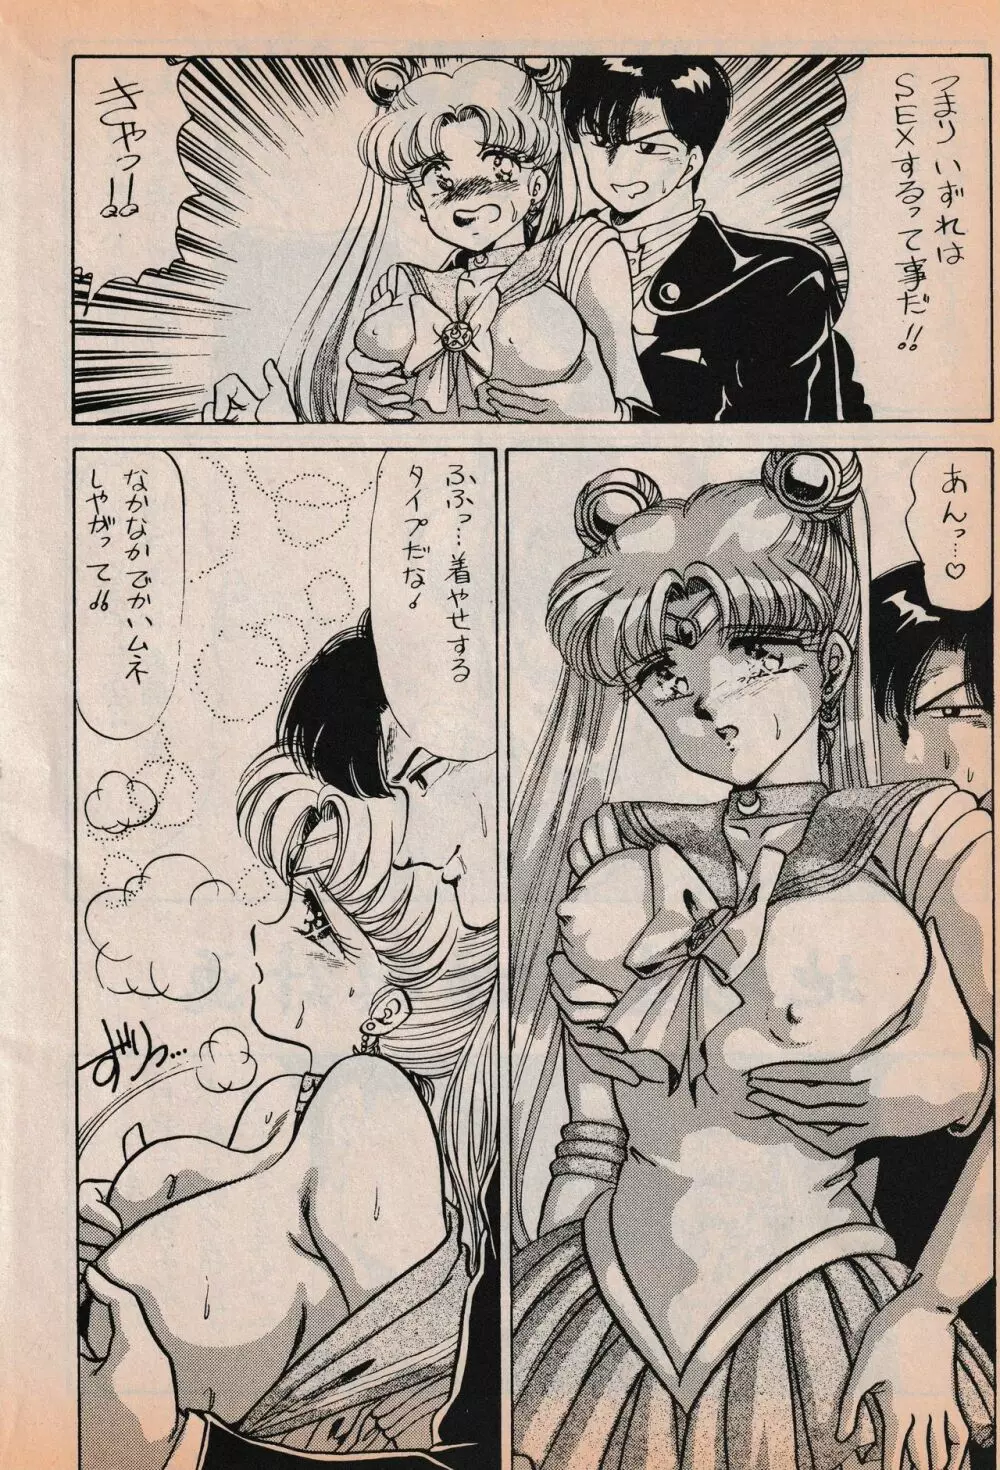 Sailor X vol. 7 - The Kama Sutra Of Pain Page.3